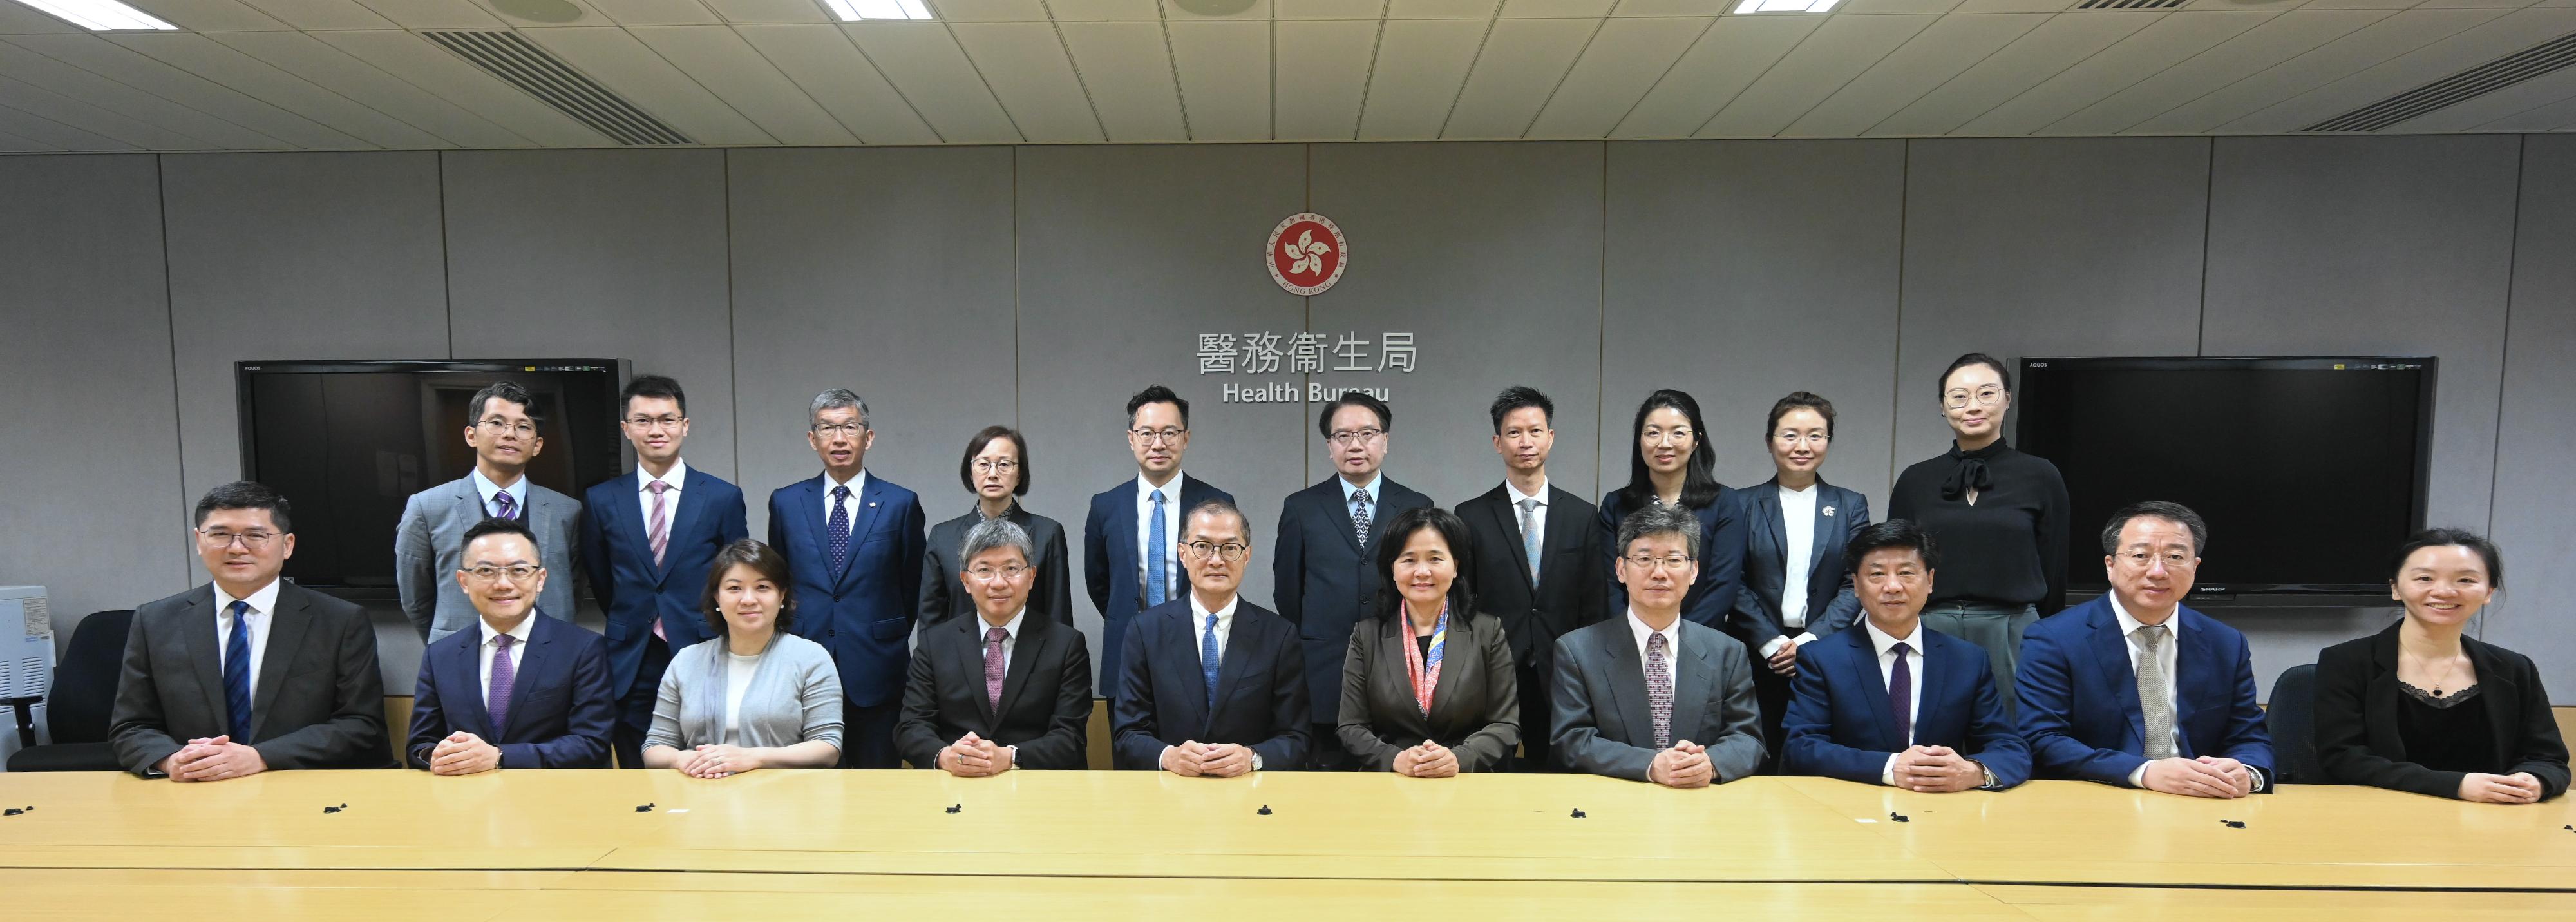 The Secretary for Health, Professor Lo Chung-mau, met with the delegation of the National Administration of Traditional Chinese Medicine (NATCM) at the Central Government Offices today (May 15). Photo shows Professor Lo (front row, fifth left); Party Group Member of the National Health Commission cum Party Secretary of the NATCM, Professor Yu Yanhong (front row, fifth right); the Permanent Secretary for Health, Mr Thomas Chan (front row, fourth left); the Under Secretary for Health, Dr Libby Lee (front row, third left); the Director of Health, Dr Ronald Lam (front row, second left); the Chief Executive of the Hospital Authority, Dr Tony Ko (front row, first left); the Deputy Secretaries for Health Mr Sam Hui (back row, fourth right) and Mr Eddie Lee (back row, fifth left); and the Project Director of the Chinese Medicine Hospital Project Office of the Health Bureau, Dr Cheung Wai-lun (back row, fifth right), and other attendees of the meeting.